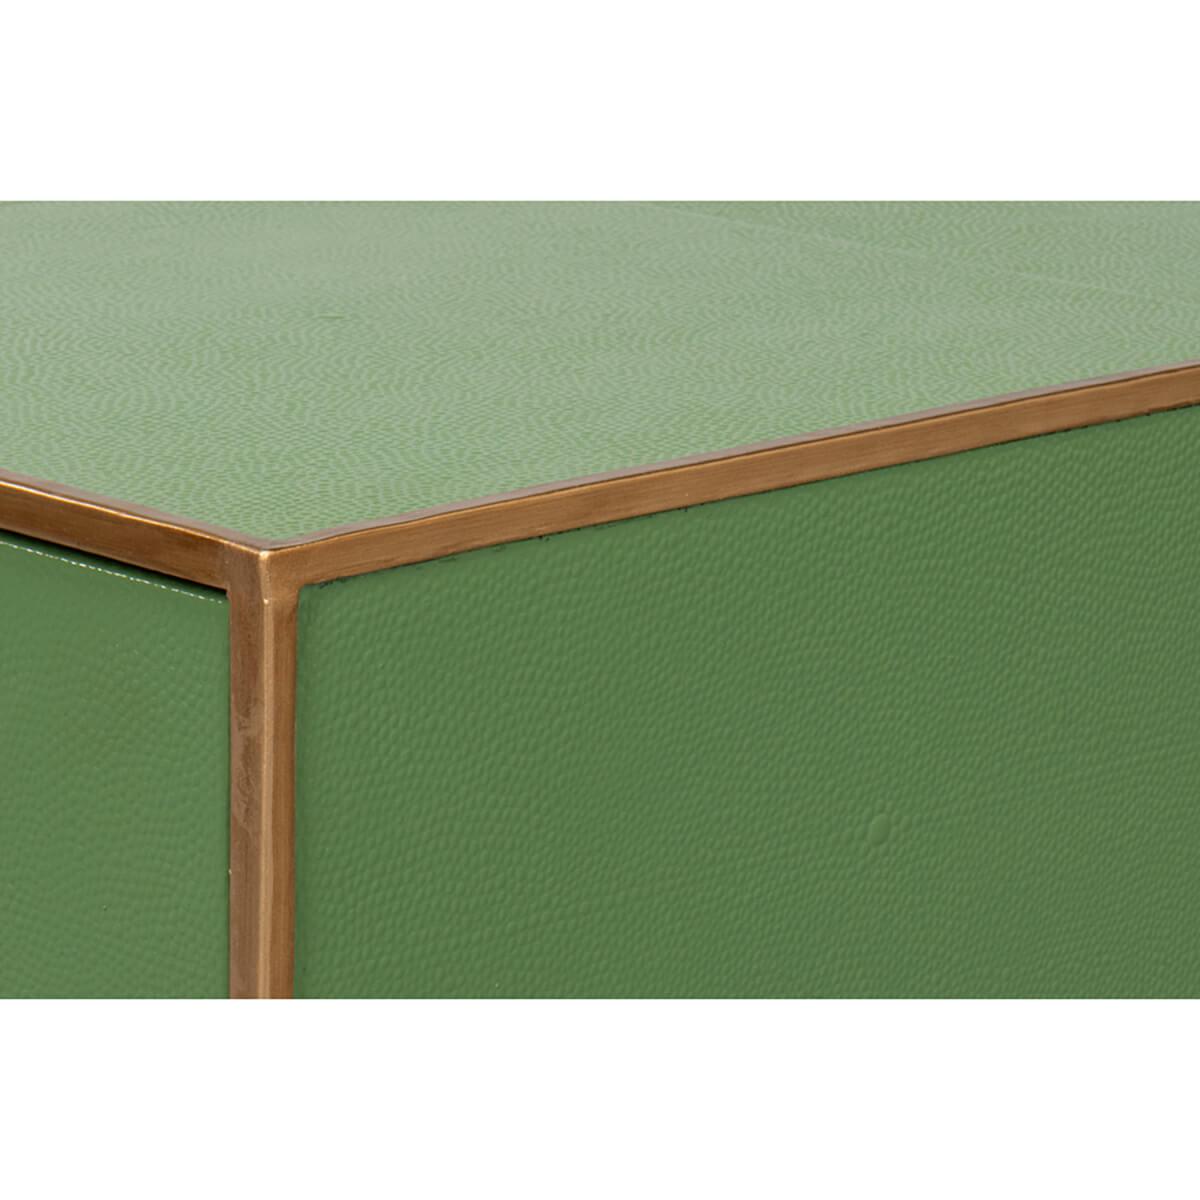 Art Deco Leather Coffee Table in Watercress Green For Sale 5